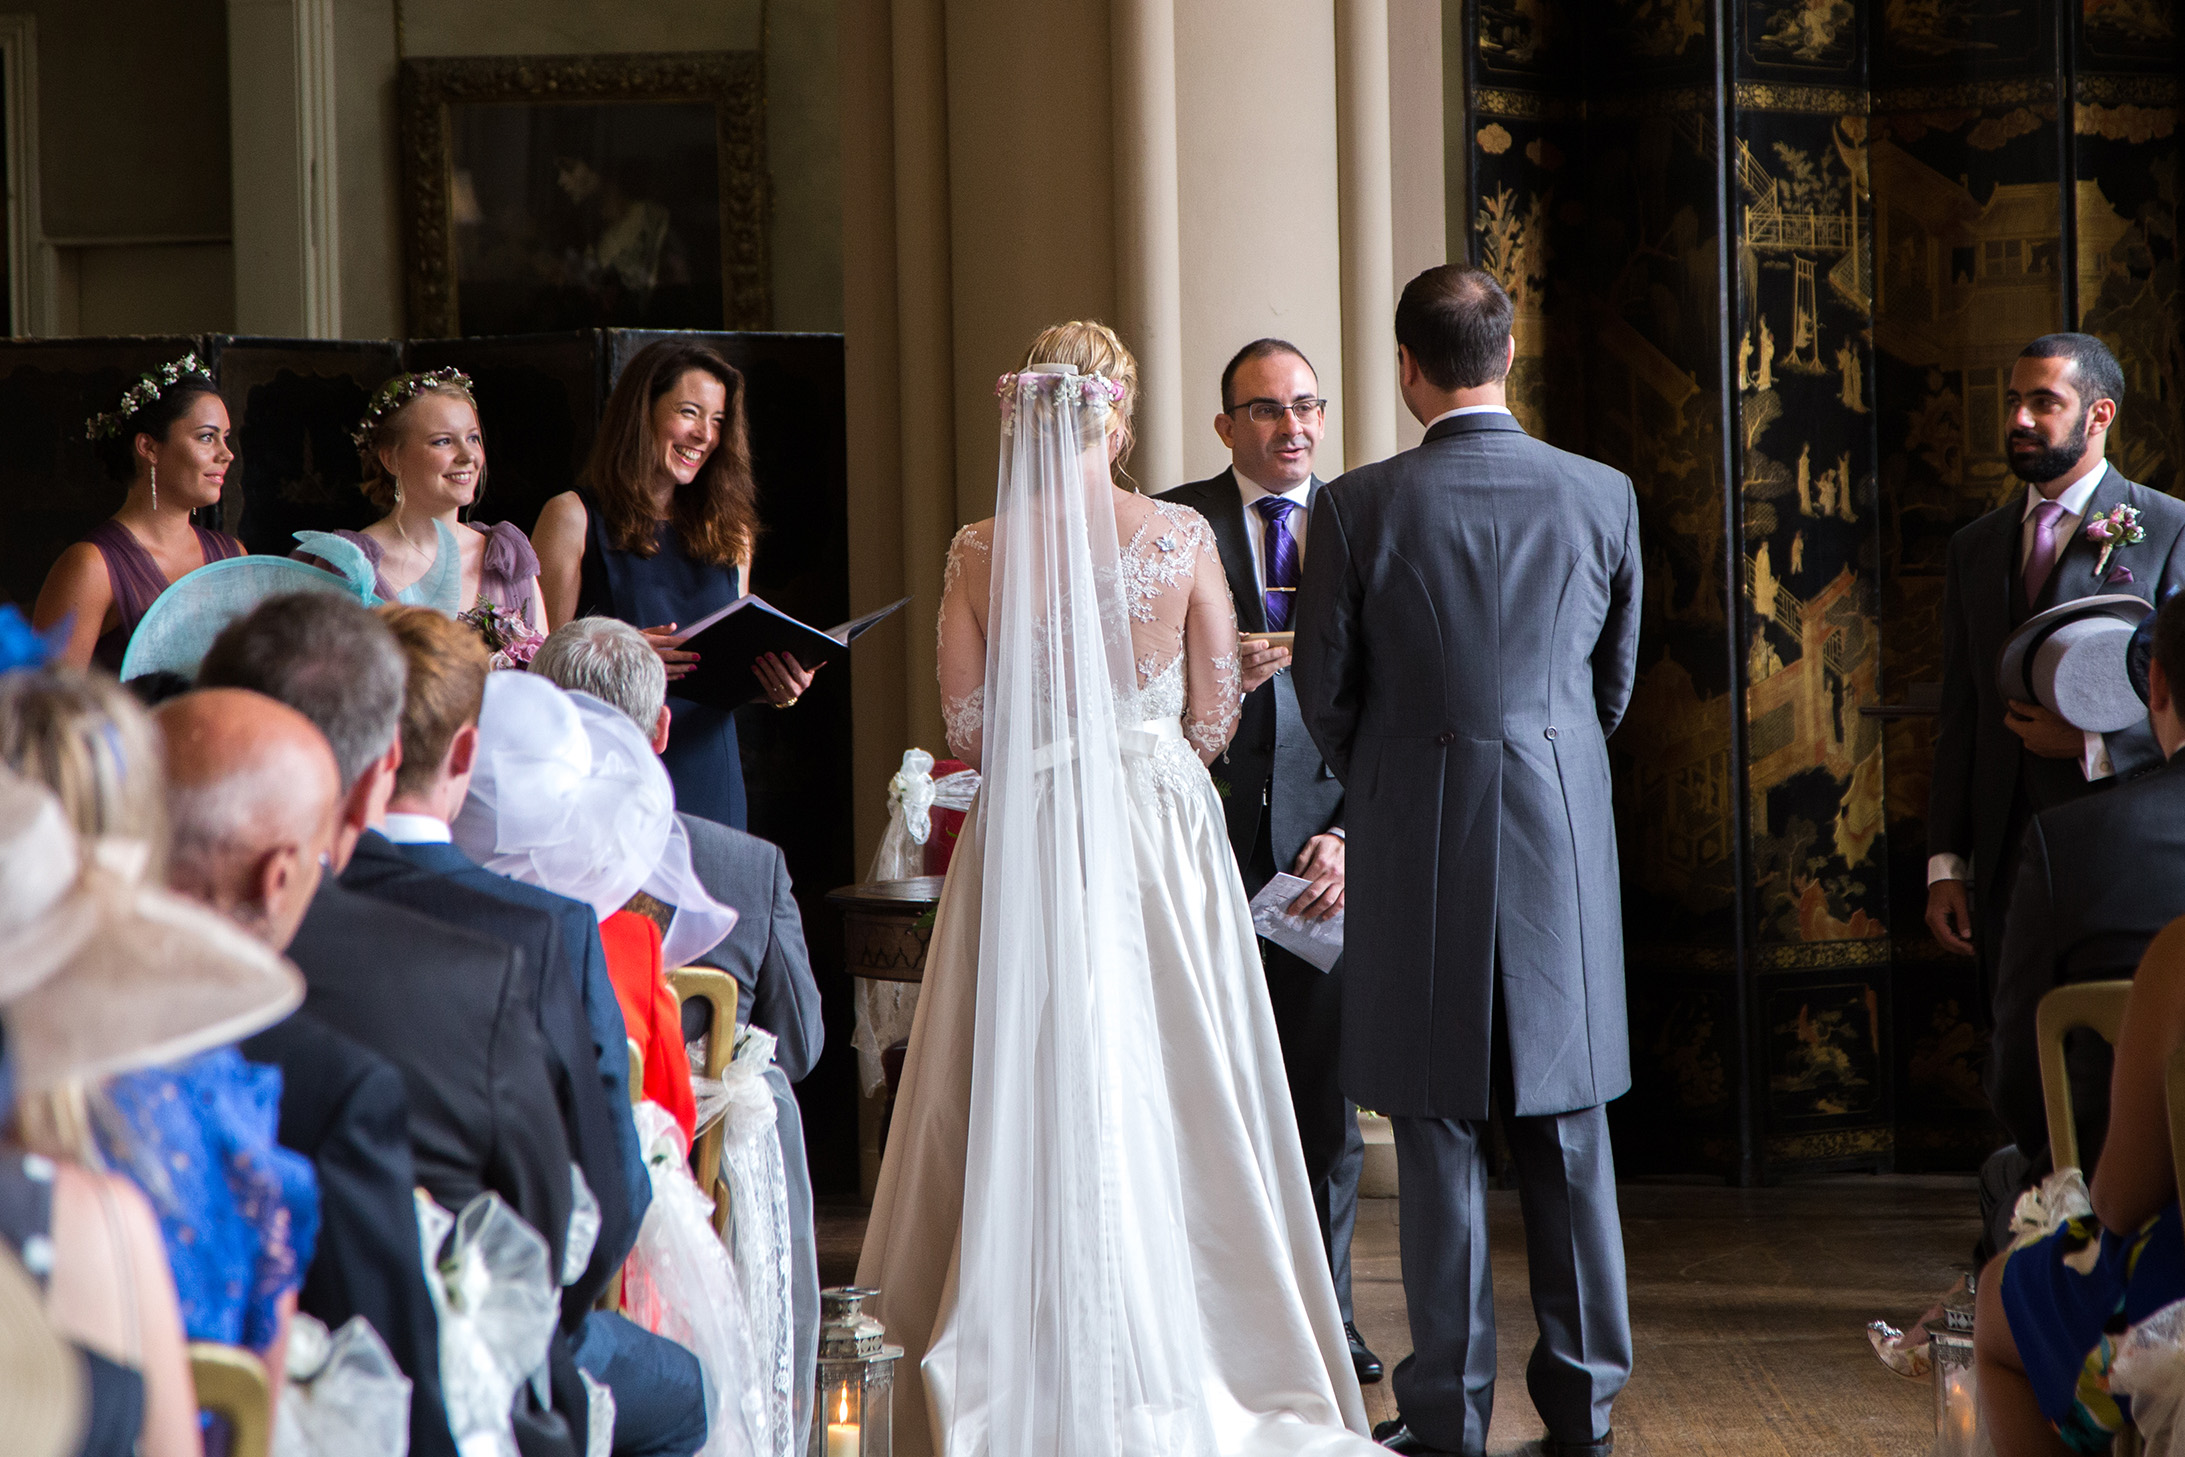 A traditional wedding with an American twist at the beautiful Belvoir Castle